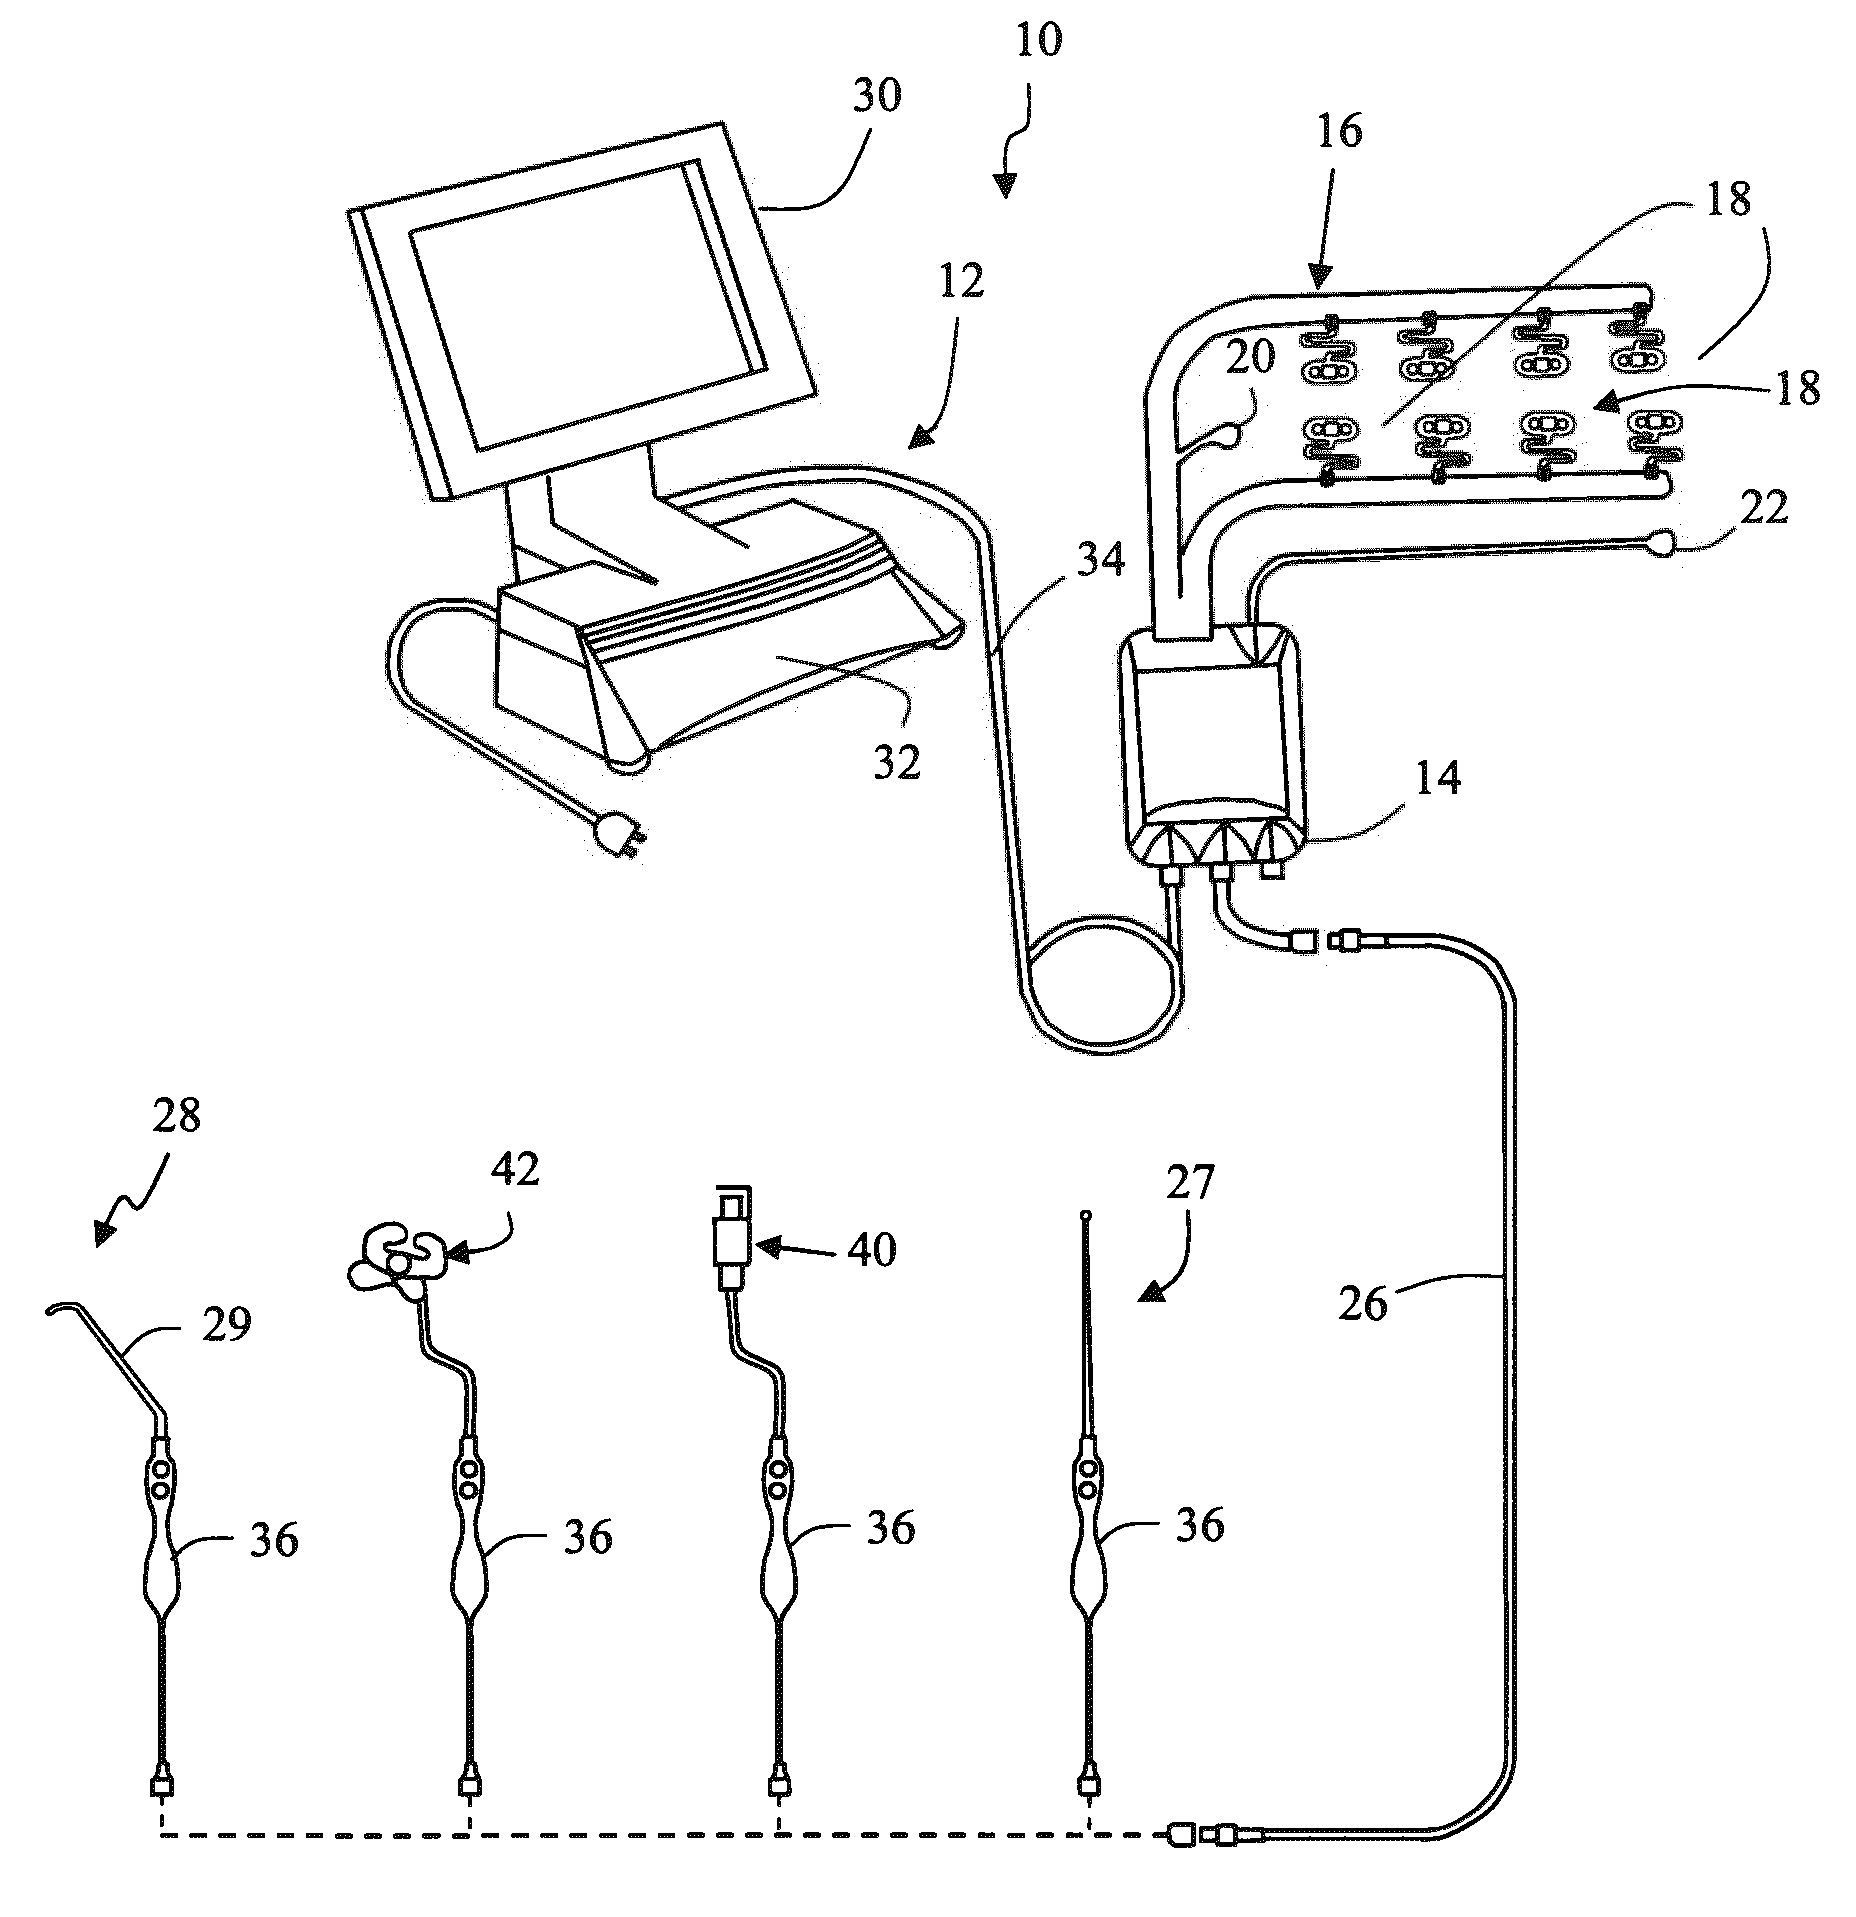 Systems and Methods for Performing Neurophysiologic Assesments With Pressure Monitoring